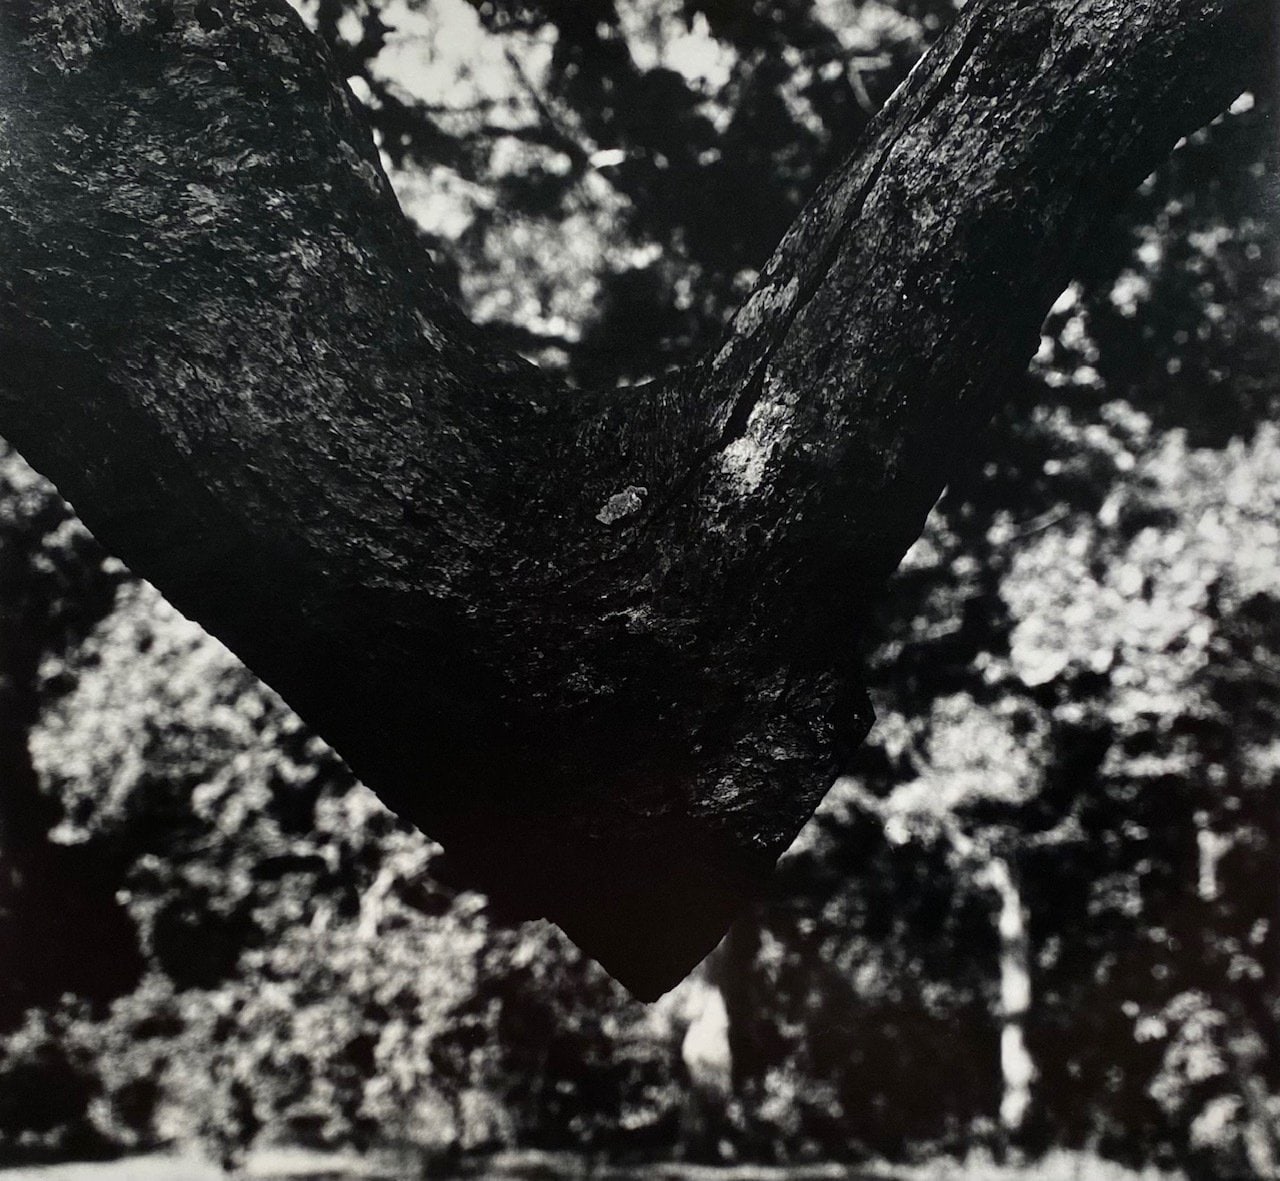 Aaron Siskind/Into Abstraction - A solo exhibition featuring the abstract photography of Aaron Siskind, mostly from late 1940-1950s. - Viewing Room - Viewing Room Archive